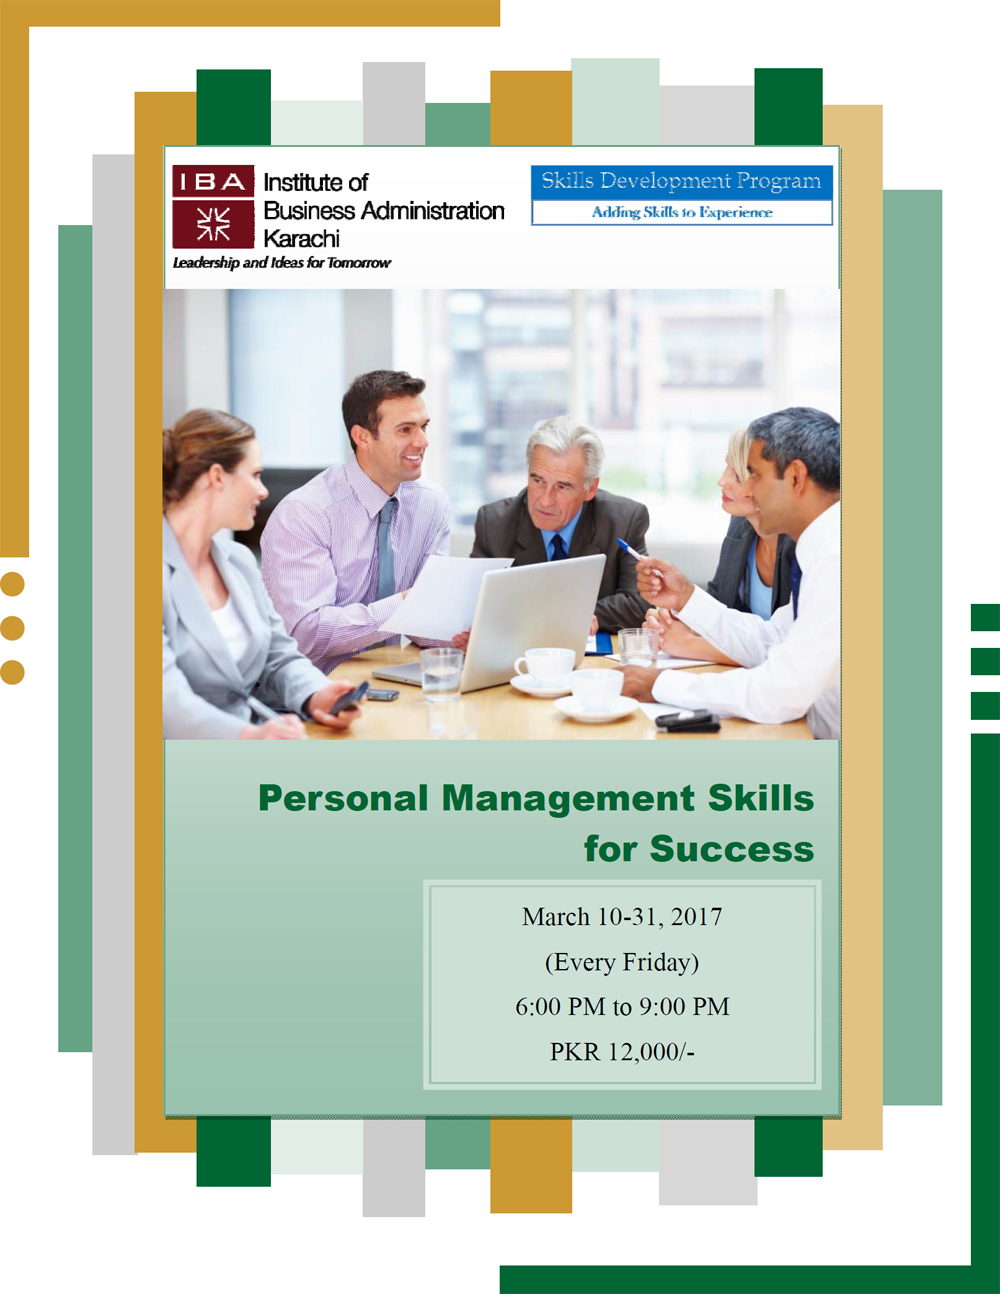 Personal Management Skills for Success